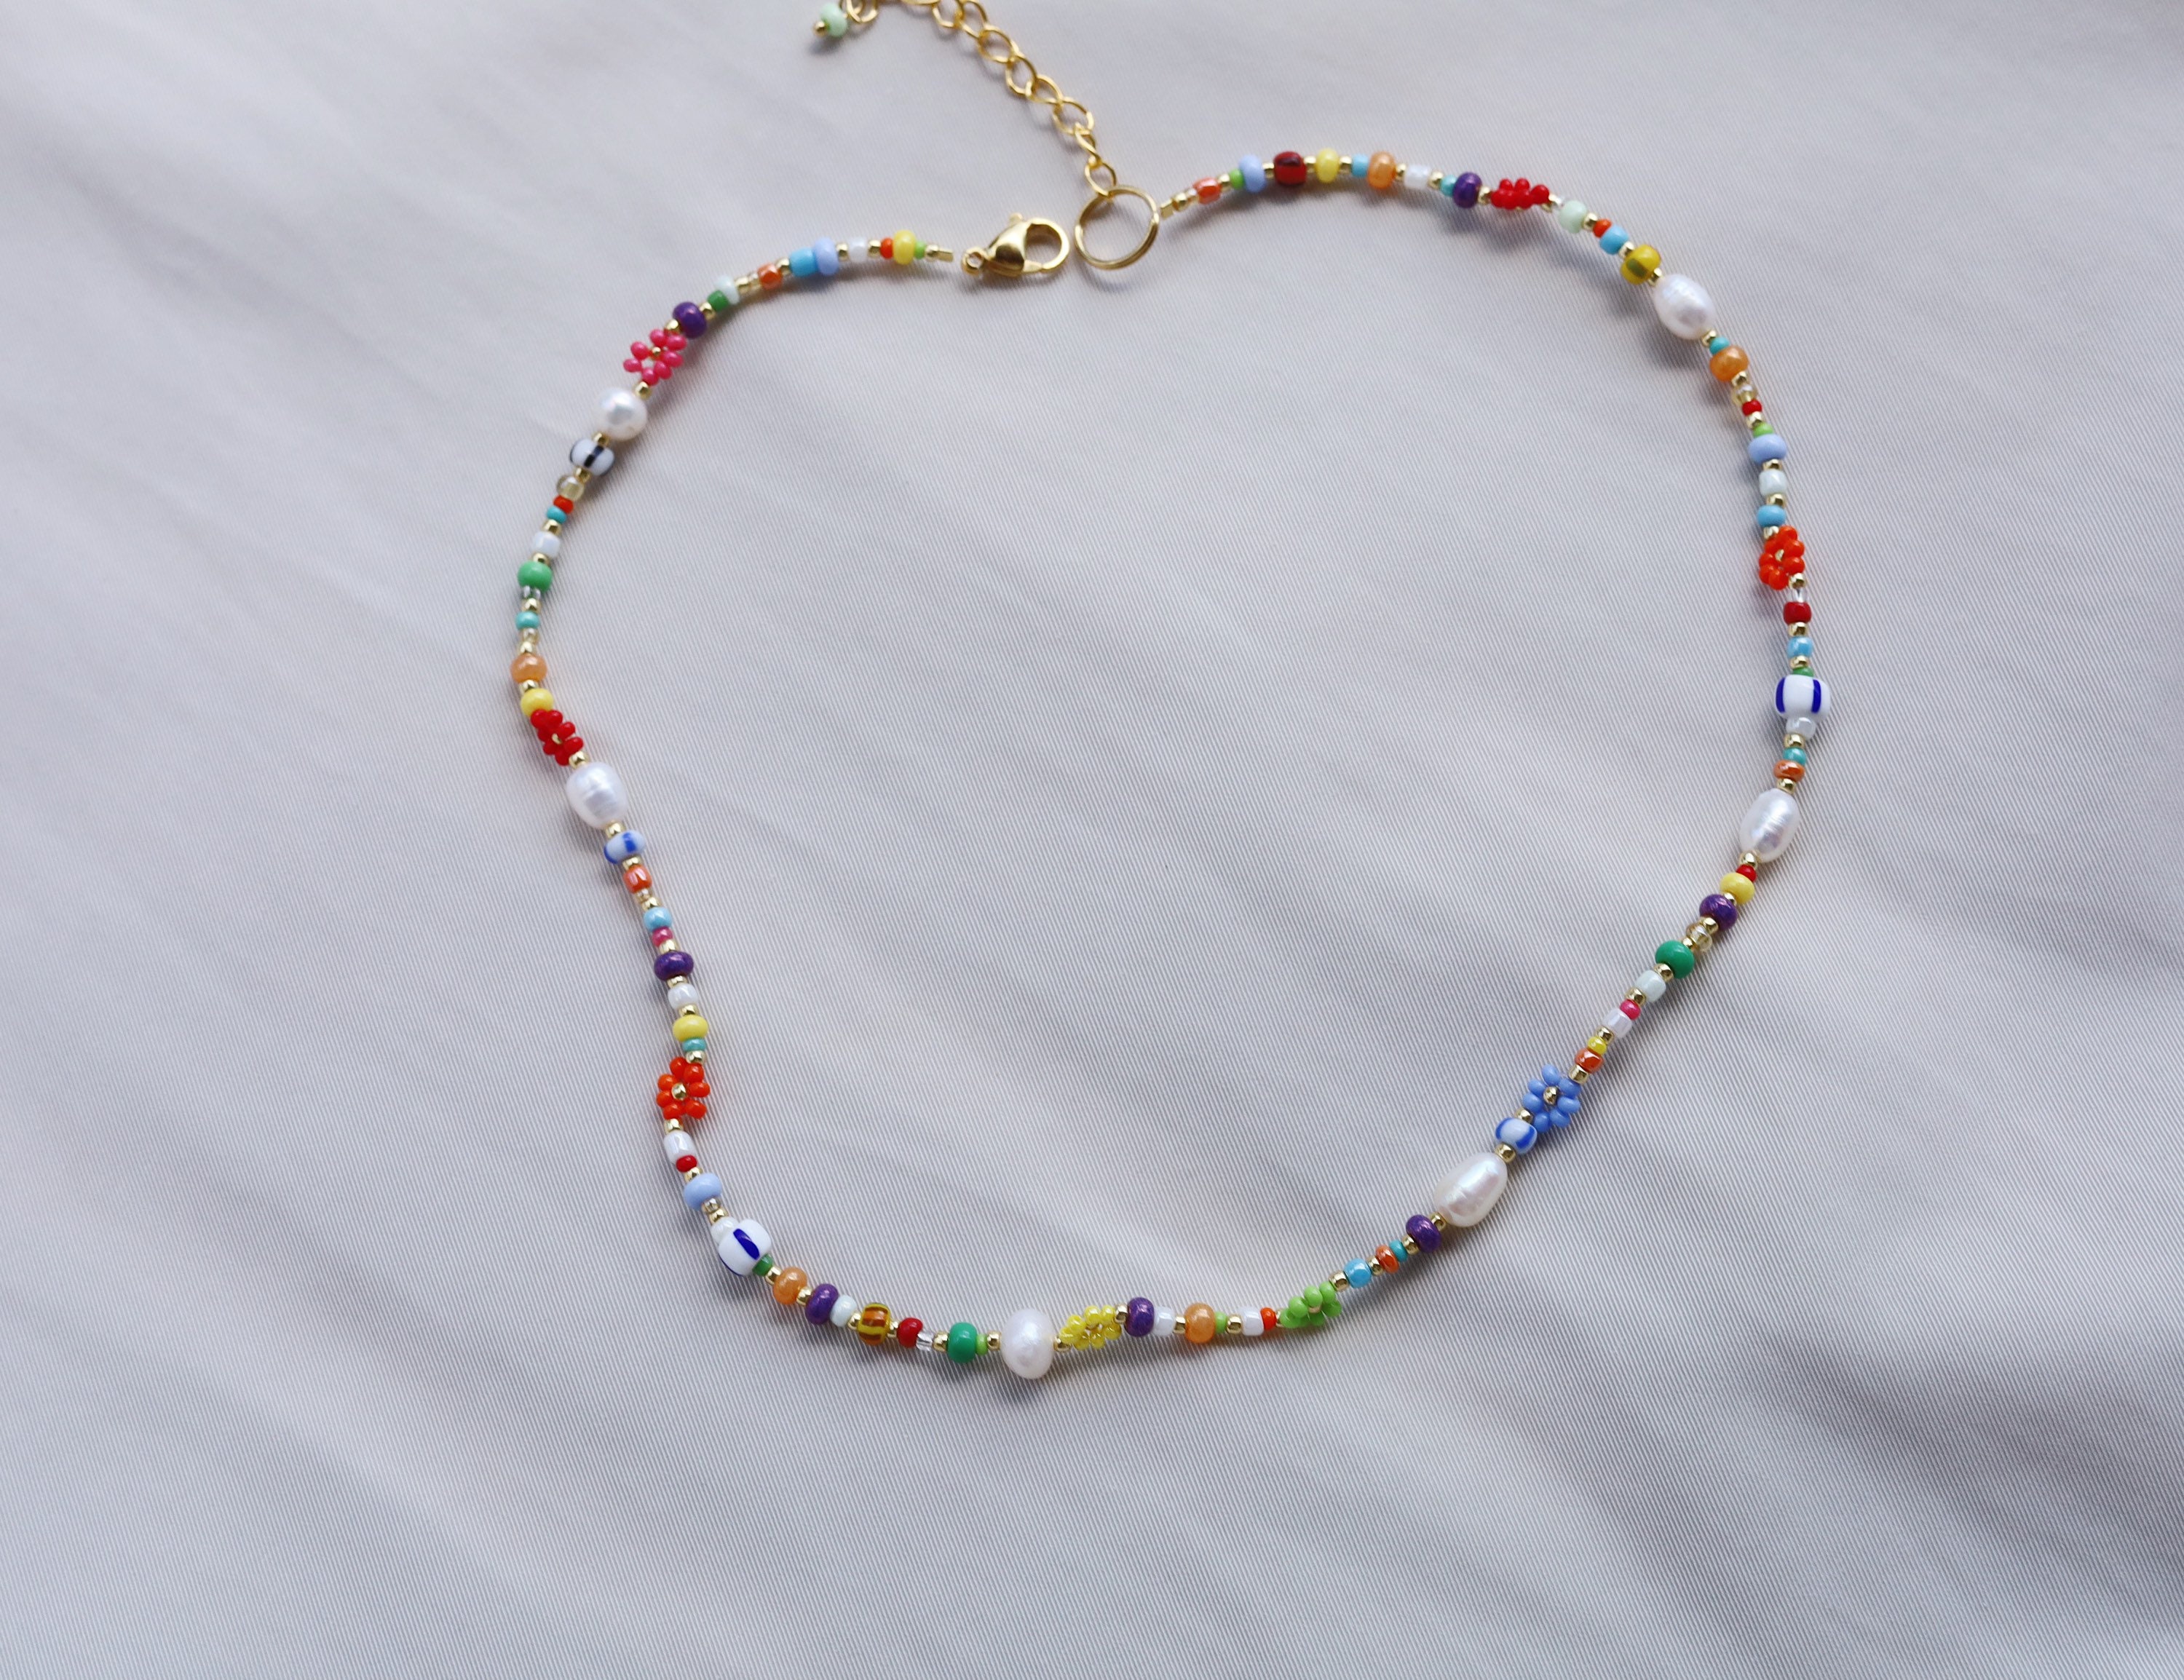 Flower Necklace Beaded Necklace Daisy Necklace Rainbow - Etsy